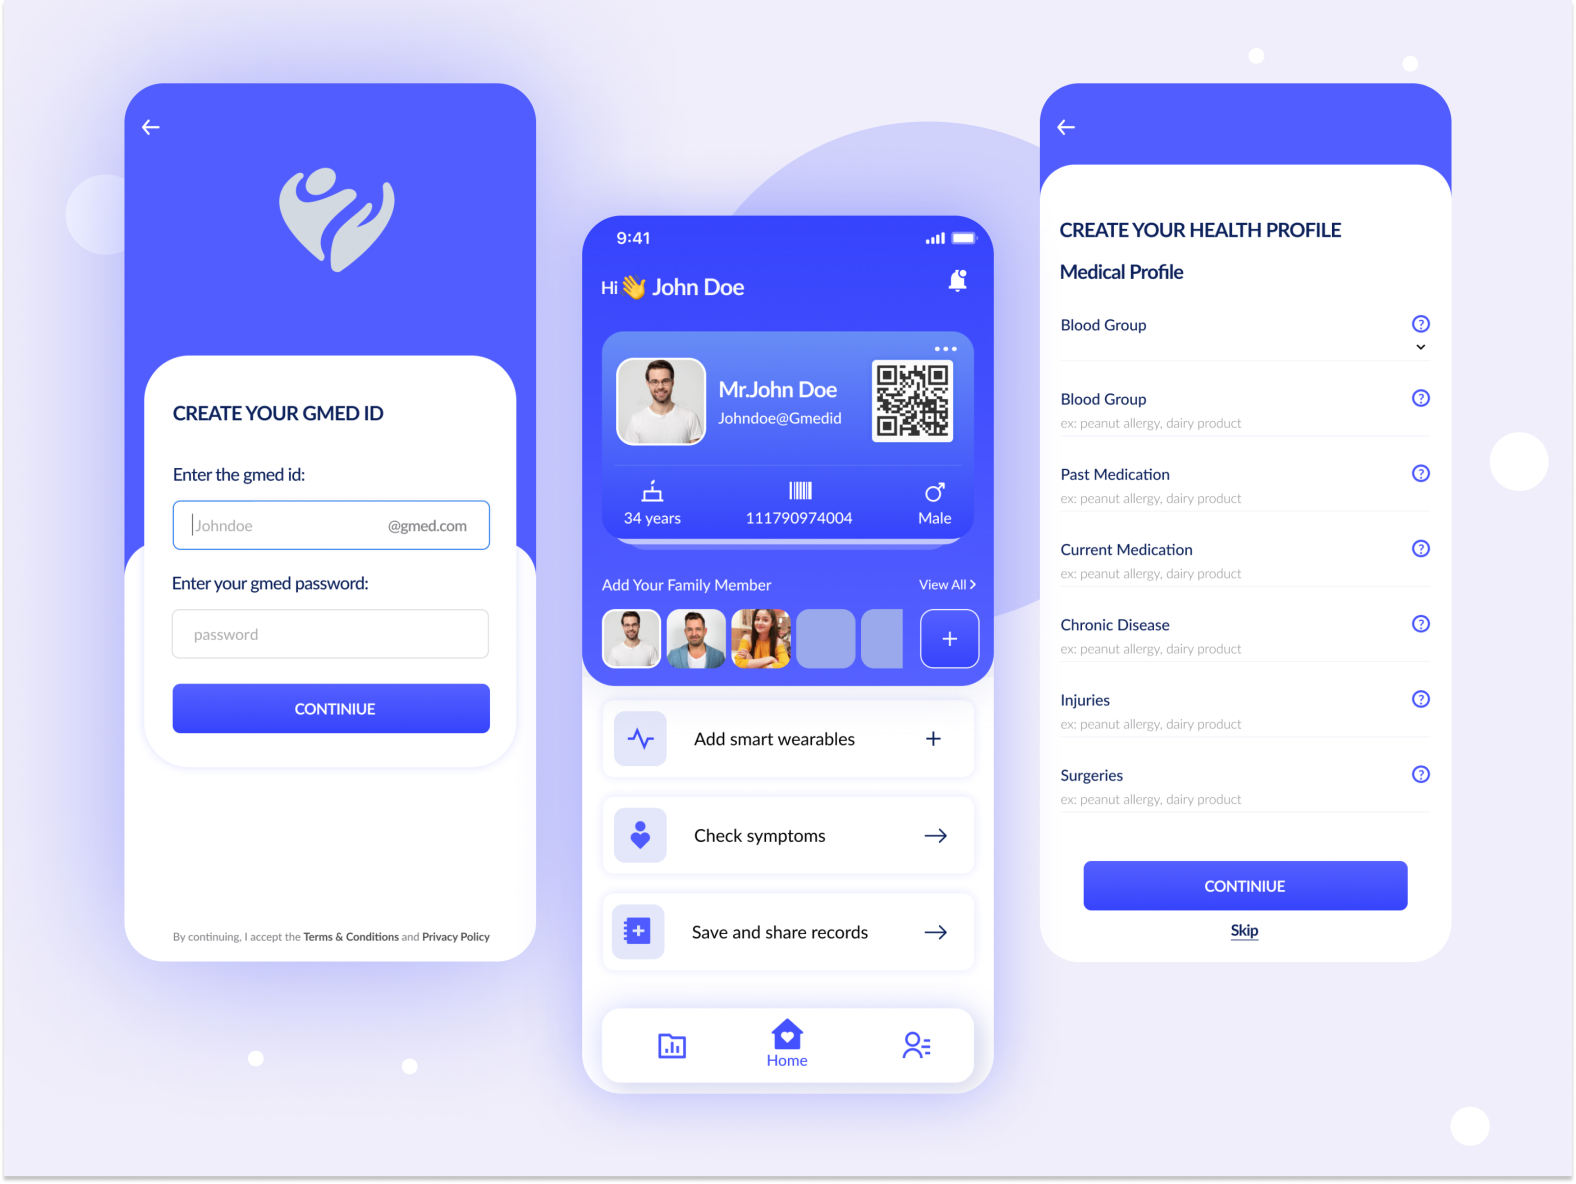 Healthcare Mobile App UI by Sathish S on Dribbble